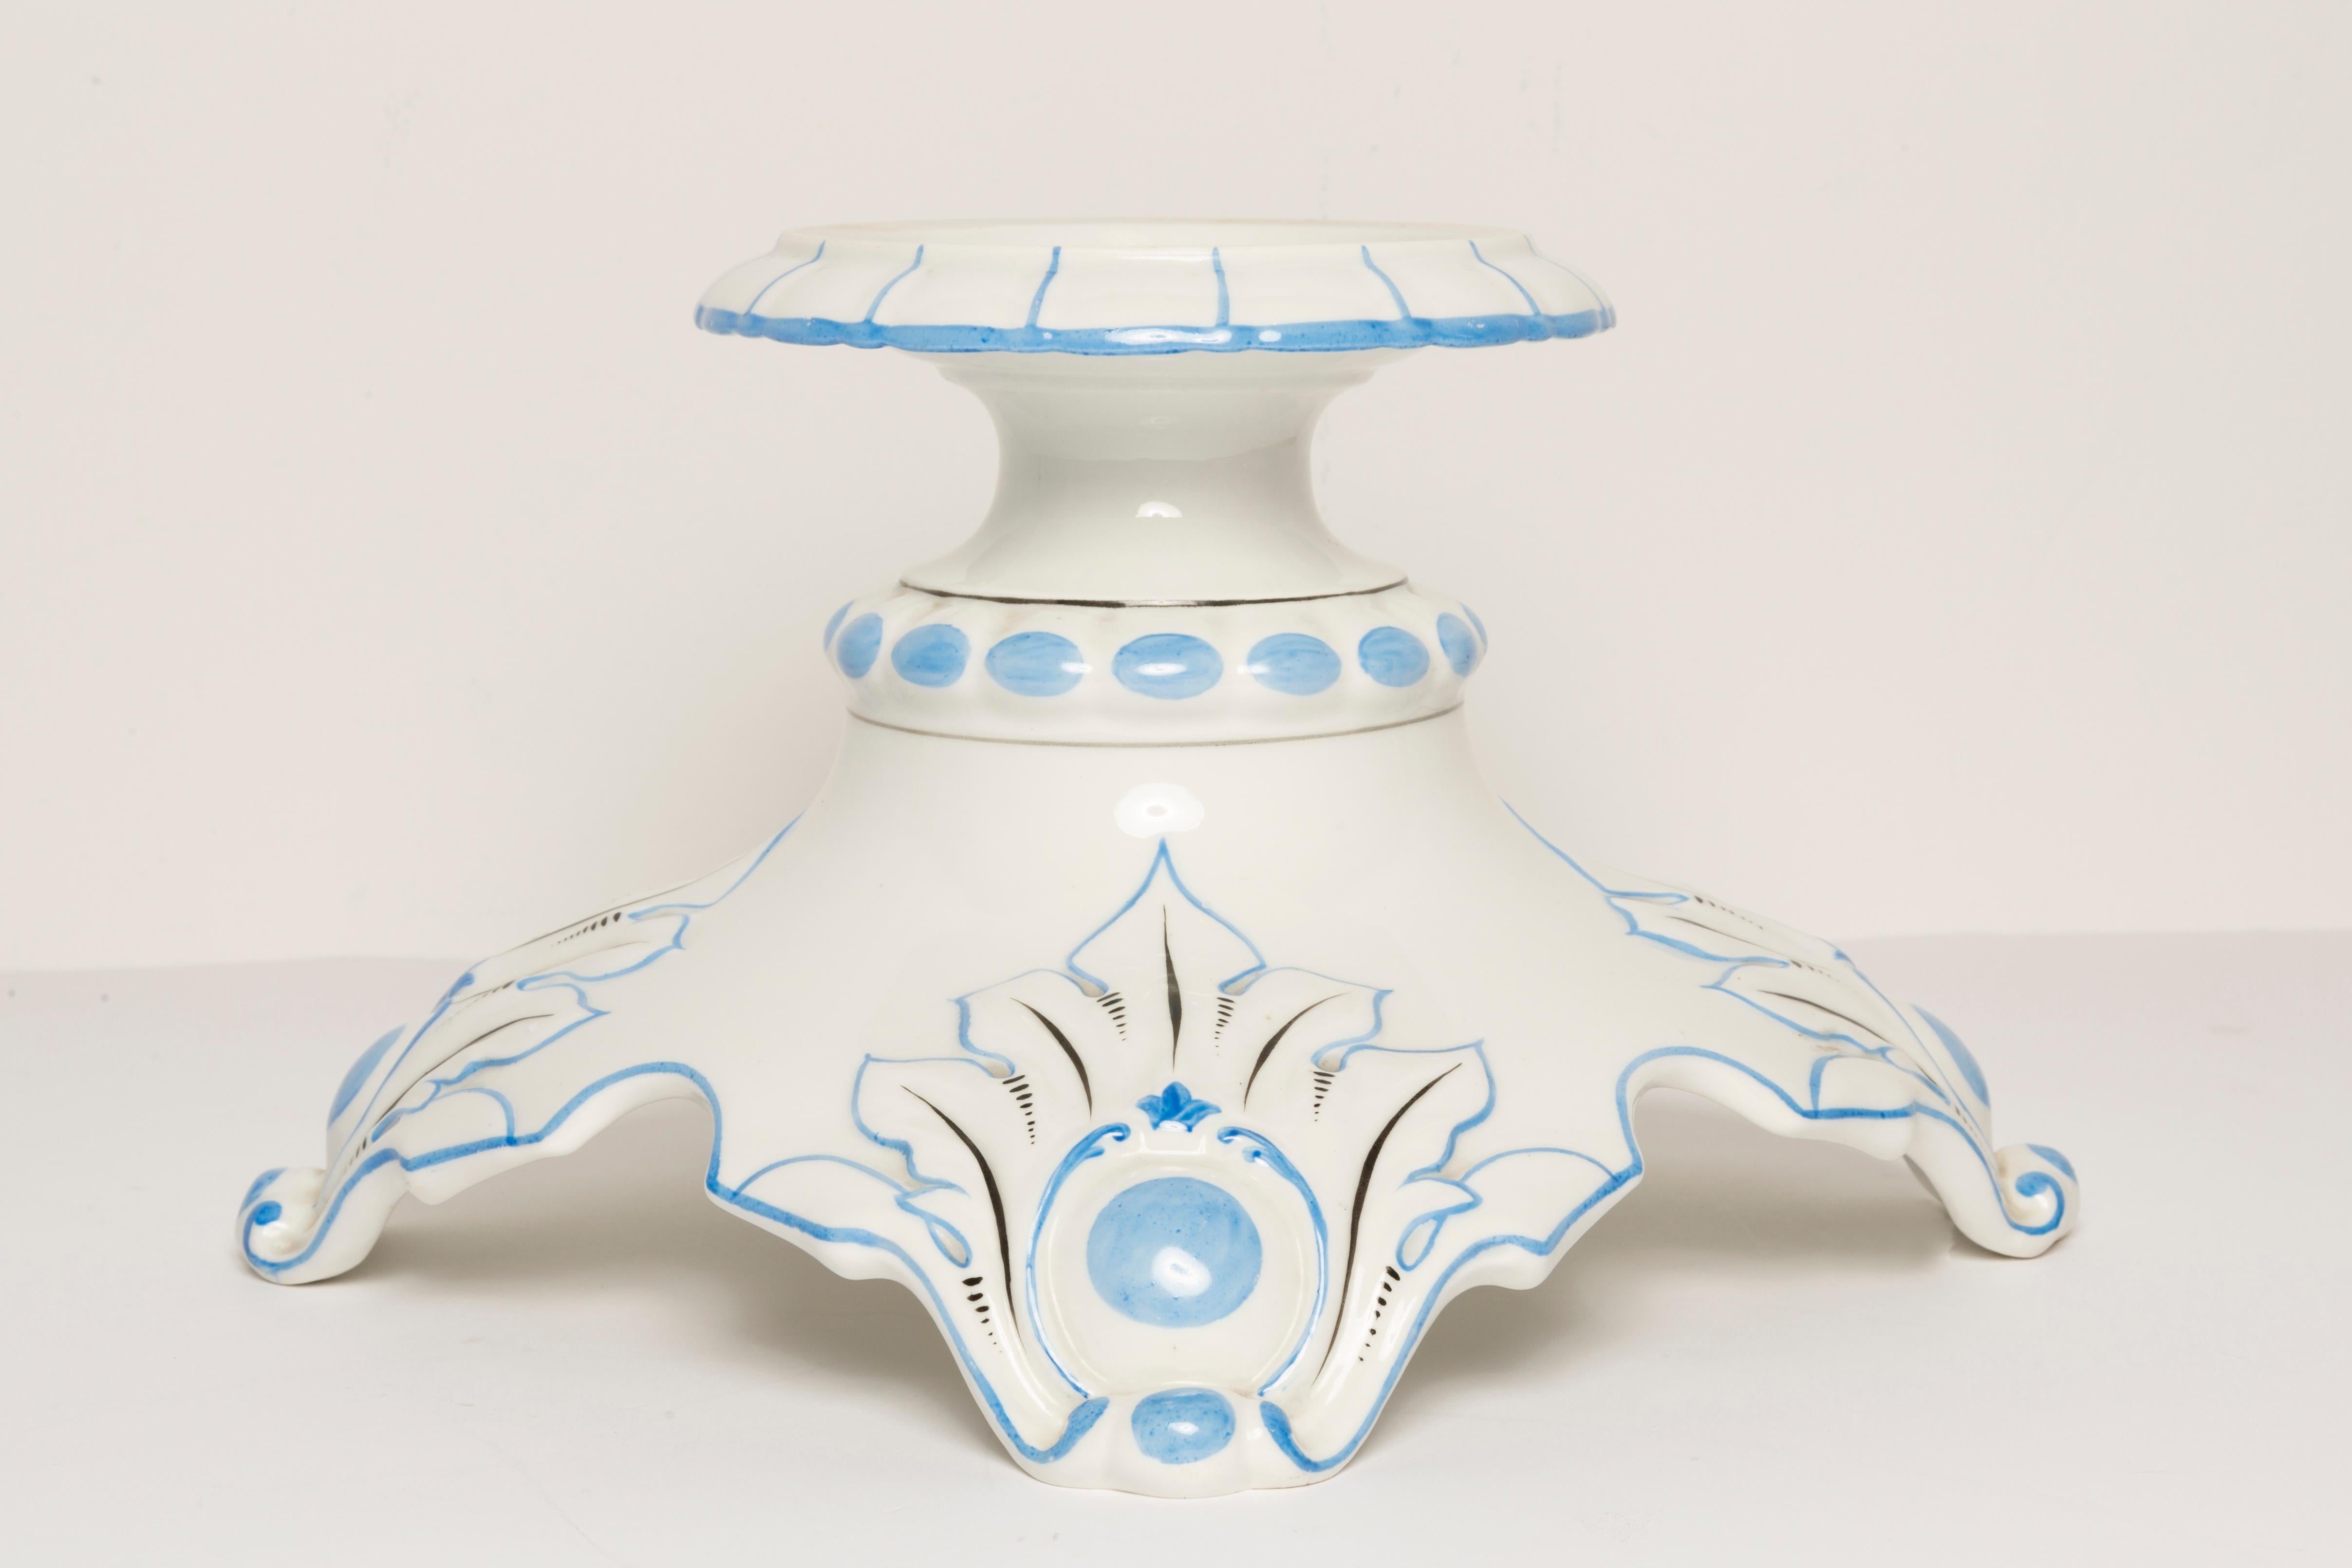 20th Century Ceramic White and Blue Candlestick, France, 1960s For Sale 2